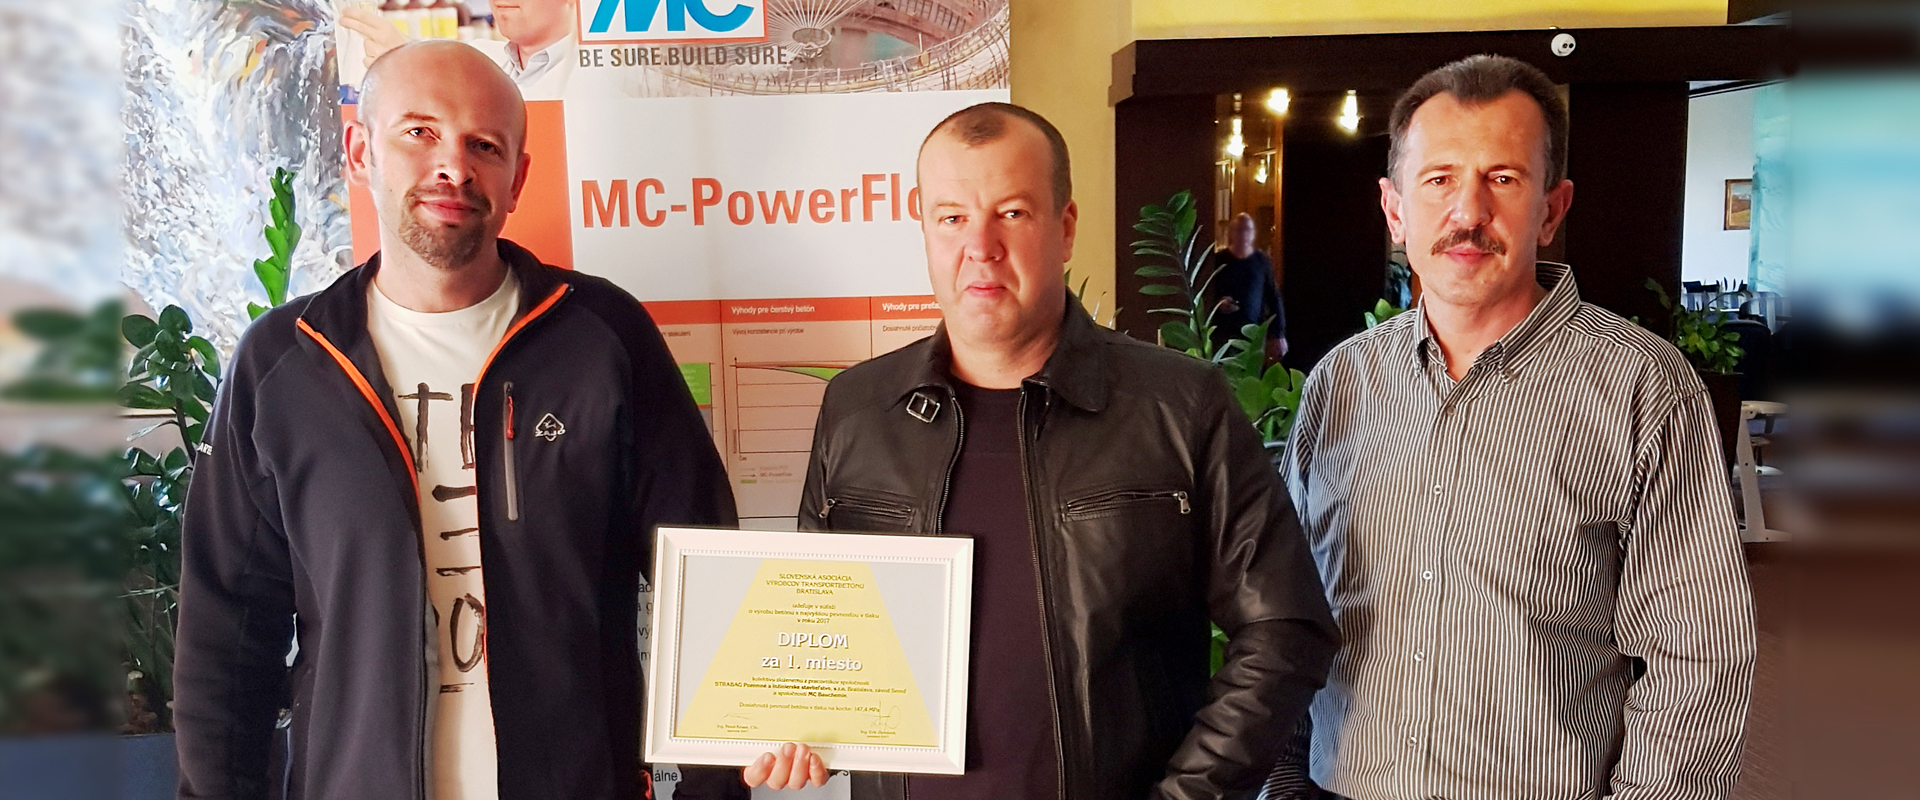 In the lobby of the Hotel Patria in Vysoké Tatry (High Tatras, Northern Slovakia), the MC team of Martin Struk, Michal Lehký and Milan Řičica (from left to right) proudly show off the certificate for first place in the SAVT competition for the strongest UHPC concrete. The Concrete Conference at which the prize was awarded was held here in October 2017.